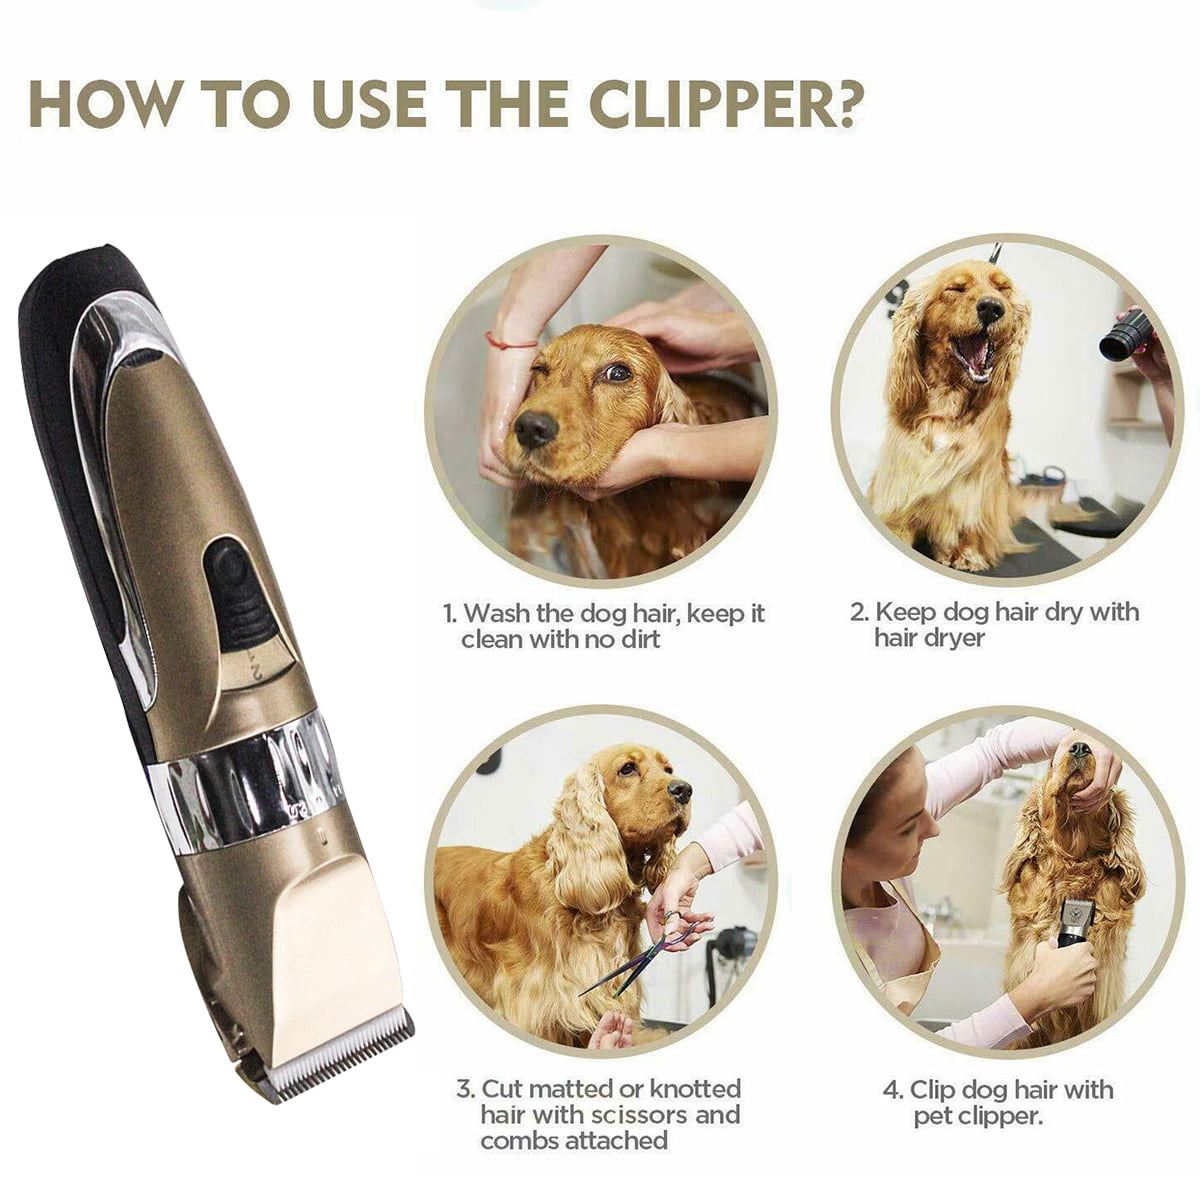 Domipet Dog Electric Grooming Clippers Kits Pets Shavers Trimmers Professional Cordless Low Noise Heavy Duty Thick Coats for Small Big Dogs Cats 